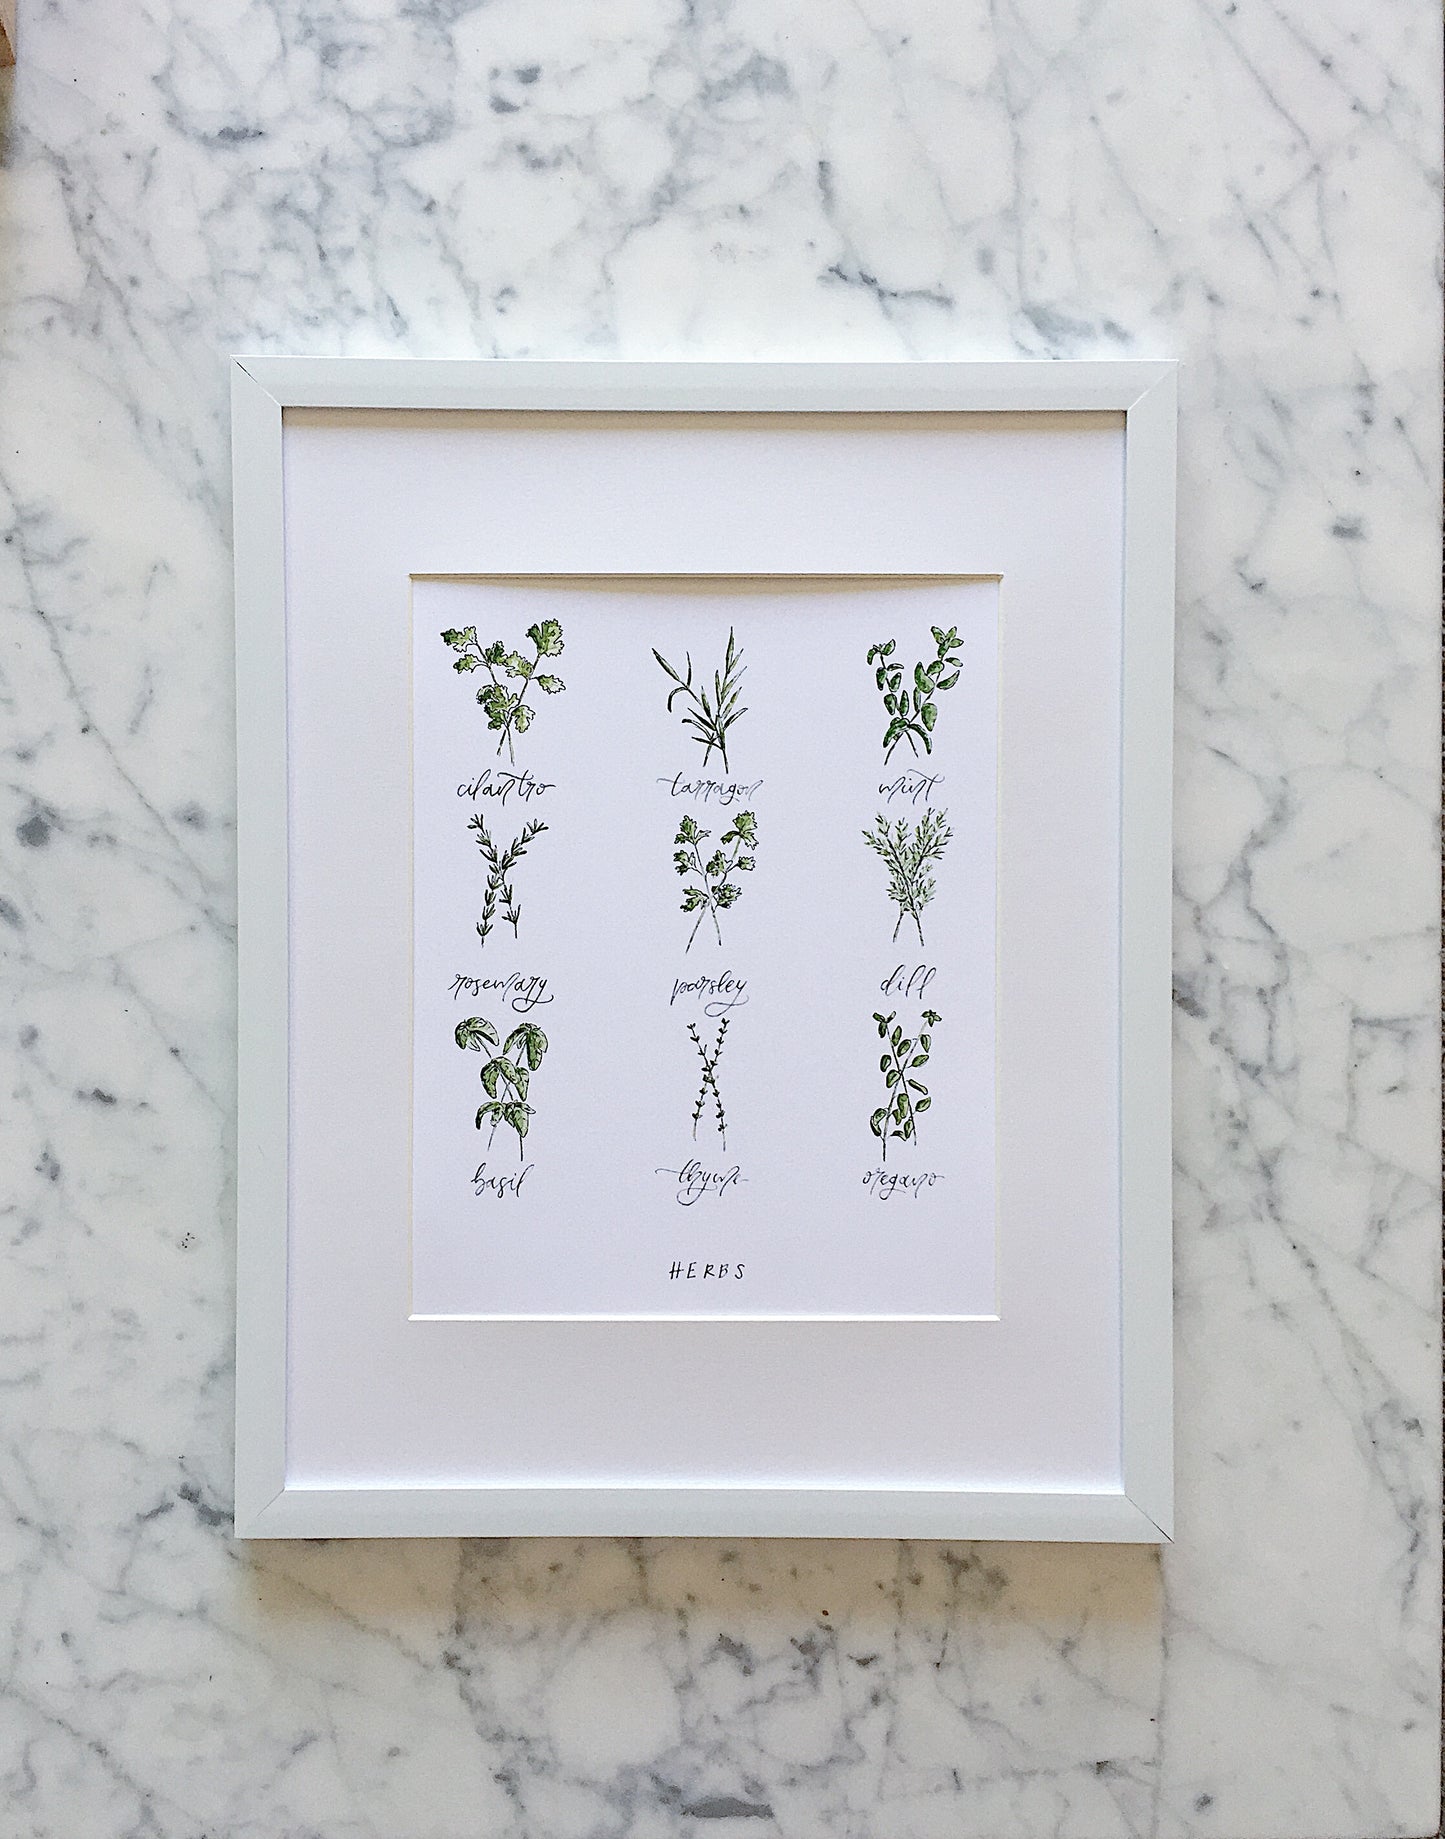 A modern watercolor art print displaying 9 different types of herbs illustrated in watercolor and pen with a clean white background - cilantro, tarragon, mint, rosemary, parsley, dill, basil, thyme, oregano